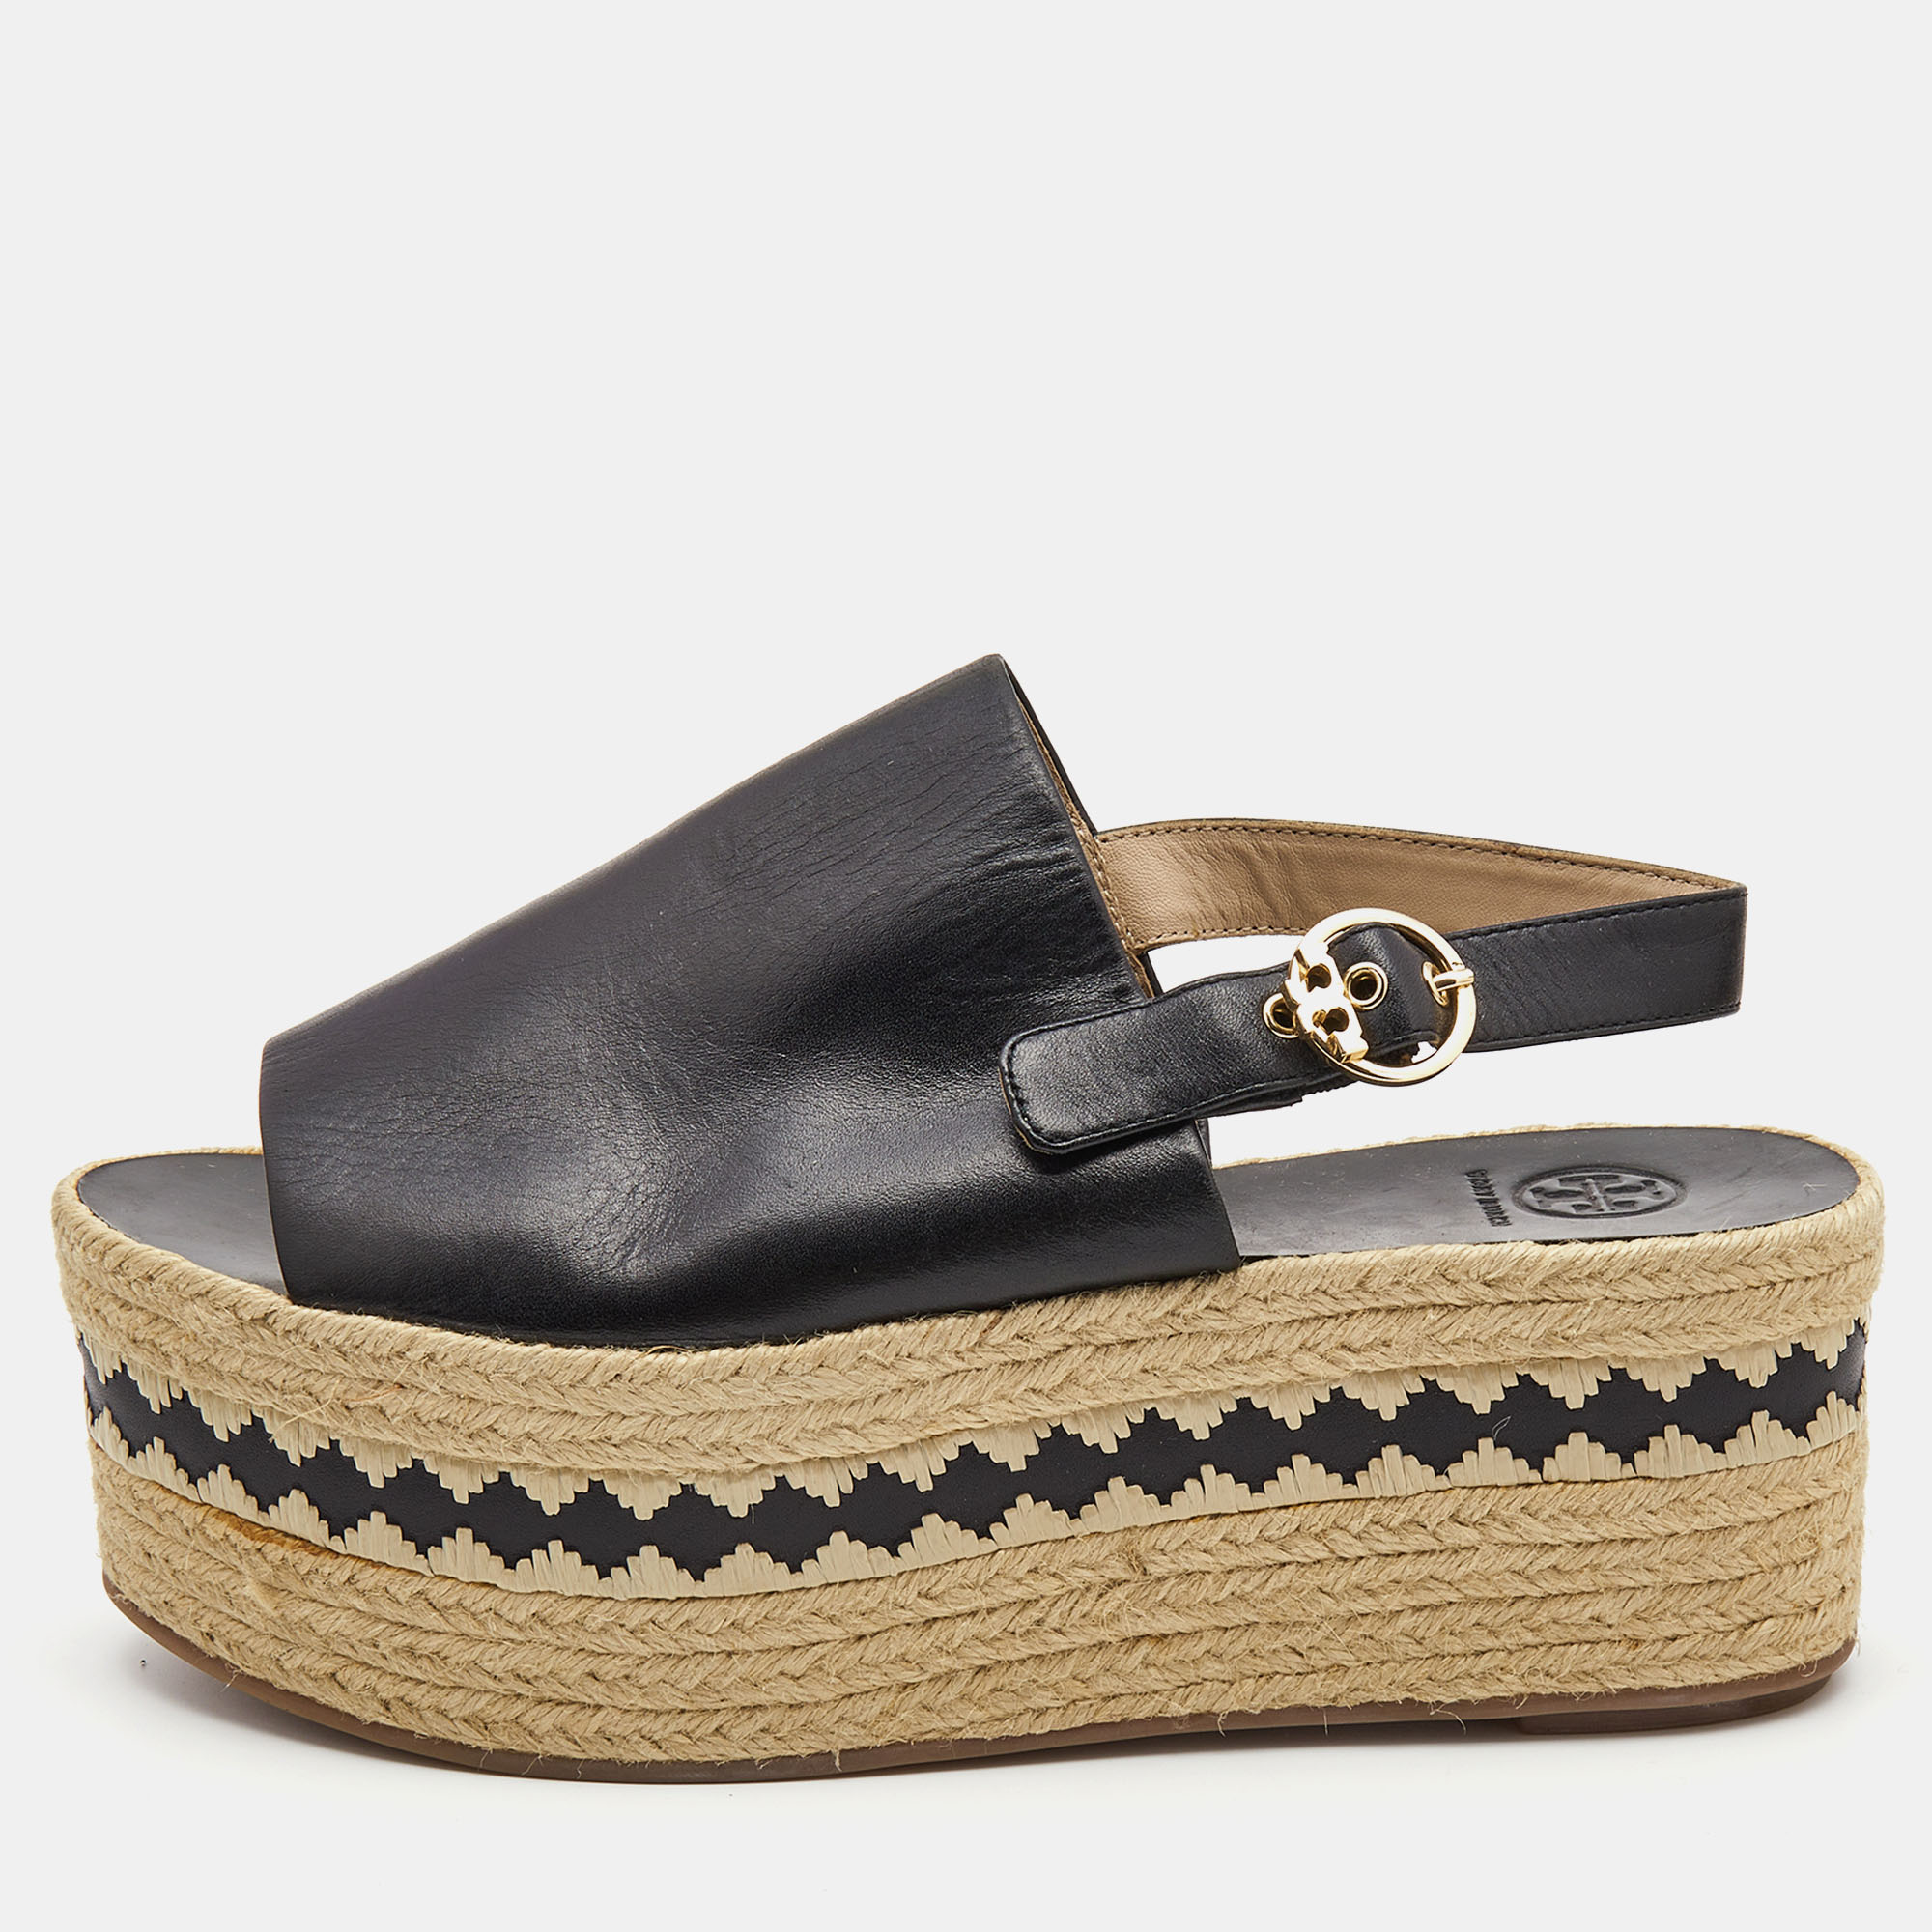 Tory Burch Black Leather Dandy Wedge Espadrille Sandals Size 40